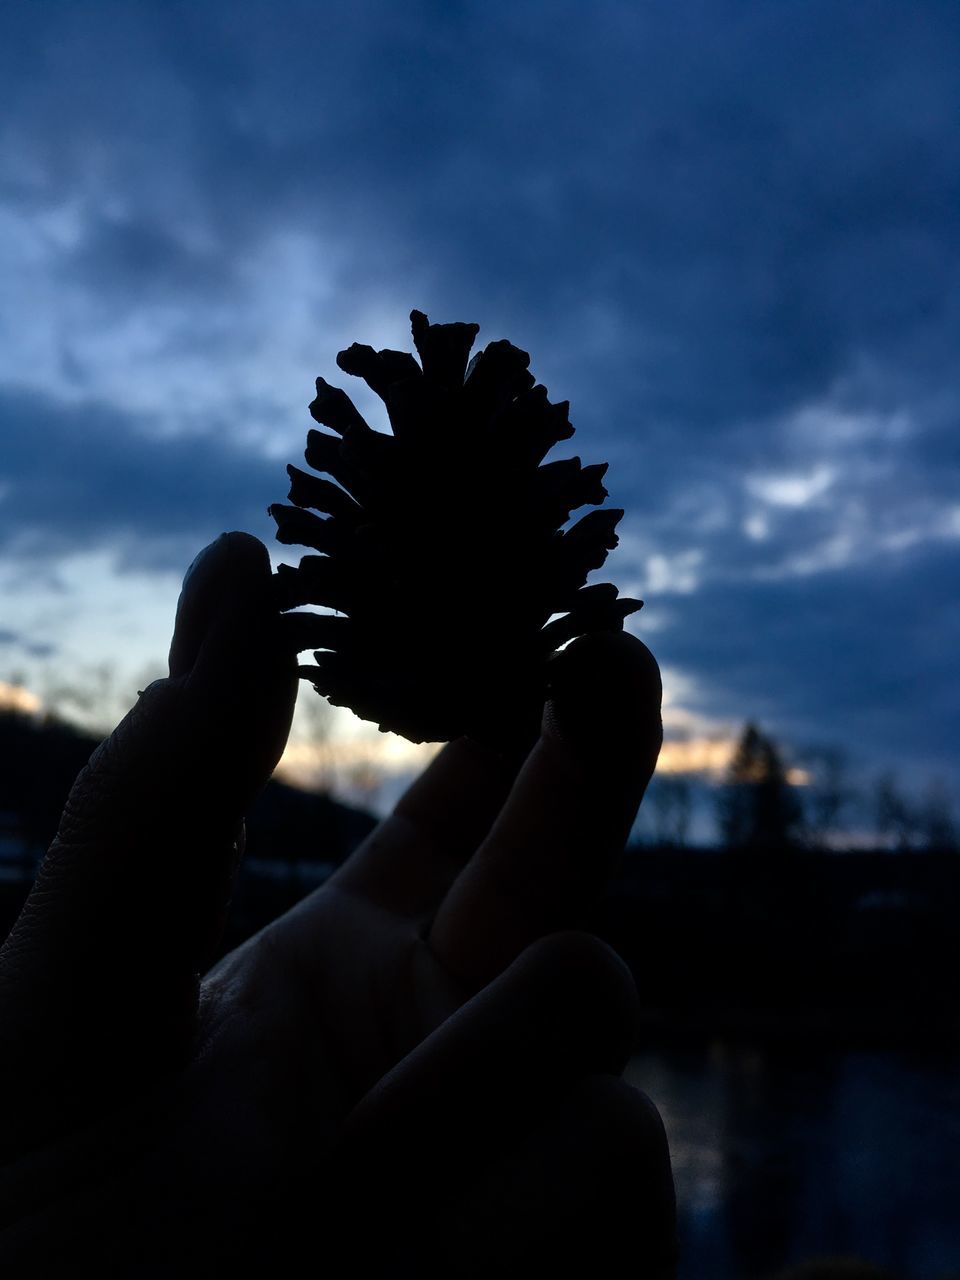 sky, hand, human hand, cloud - sky, holding, real people, human body part, one person, nature, body part, personal perspective, lifestyles, focus on foreground, finger, close-up, human finger, sunset, leisure activity, beauty in nature, unrecognizable person, outdoors, flower